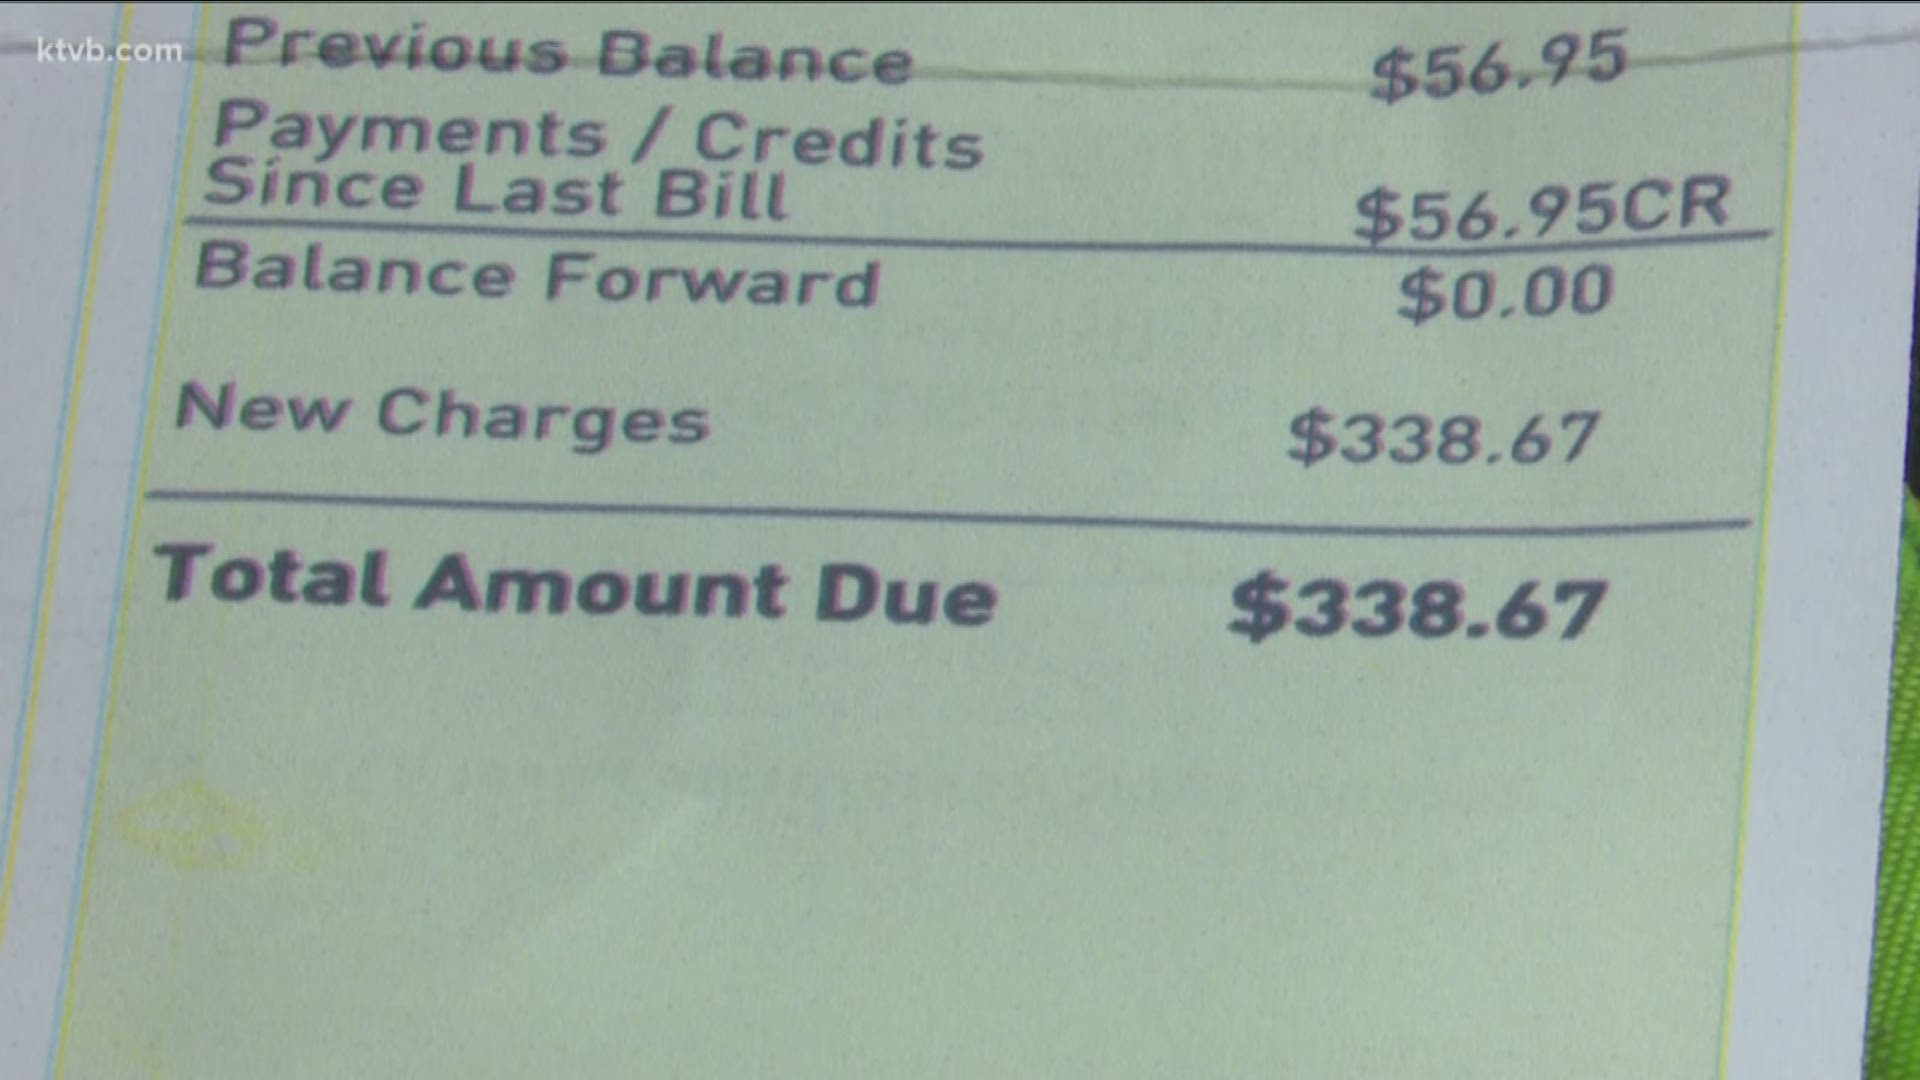 Mike Rogers saw his water bill go up 388 percent from the same time a year ago.